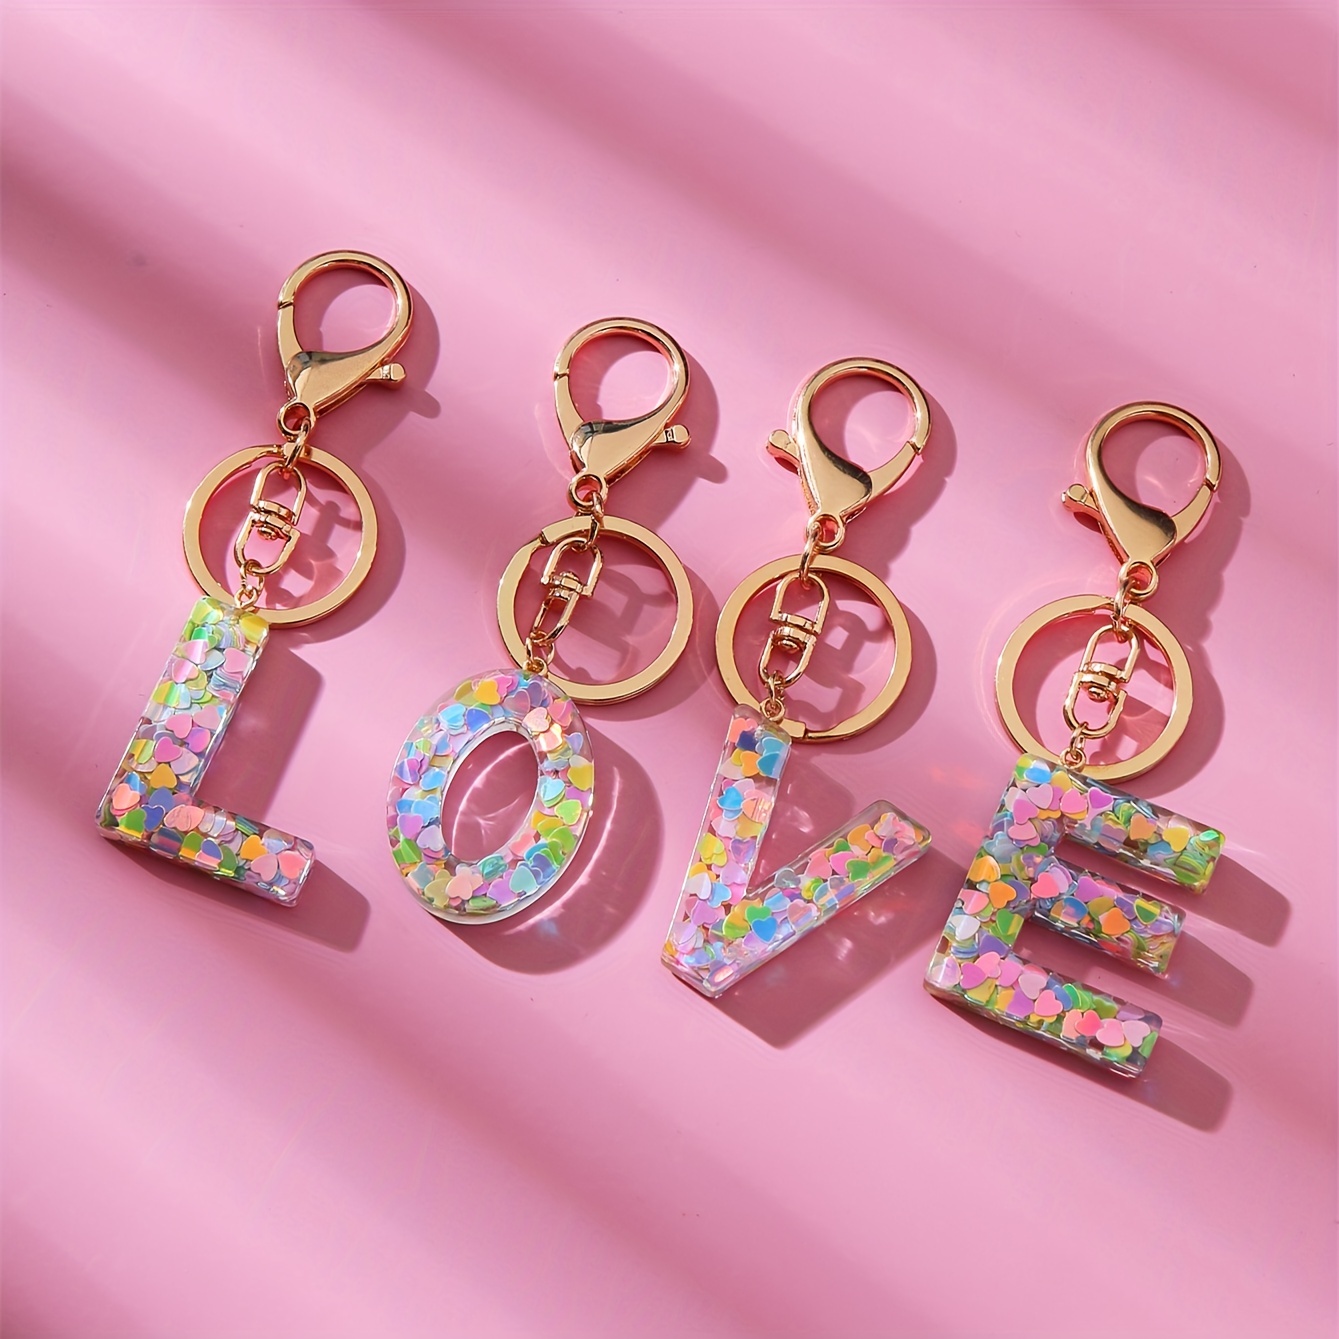 TTYY Initial Letter Keychain for Women Birthday gift To Little